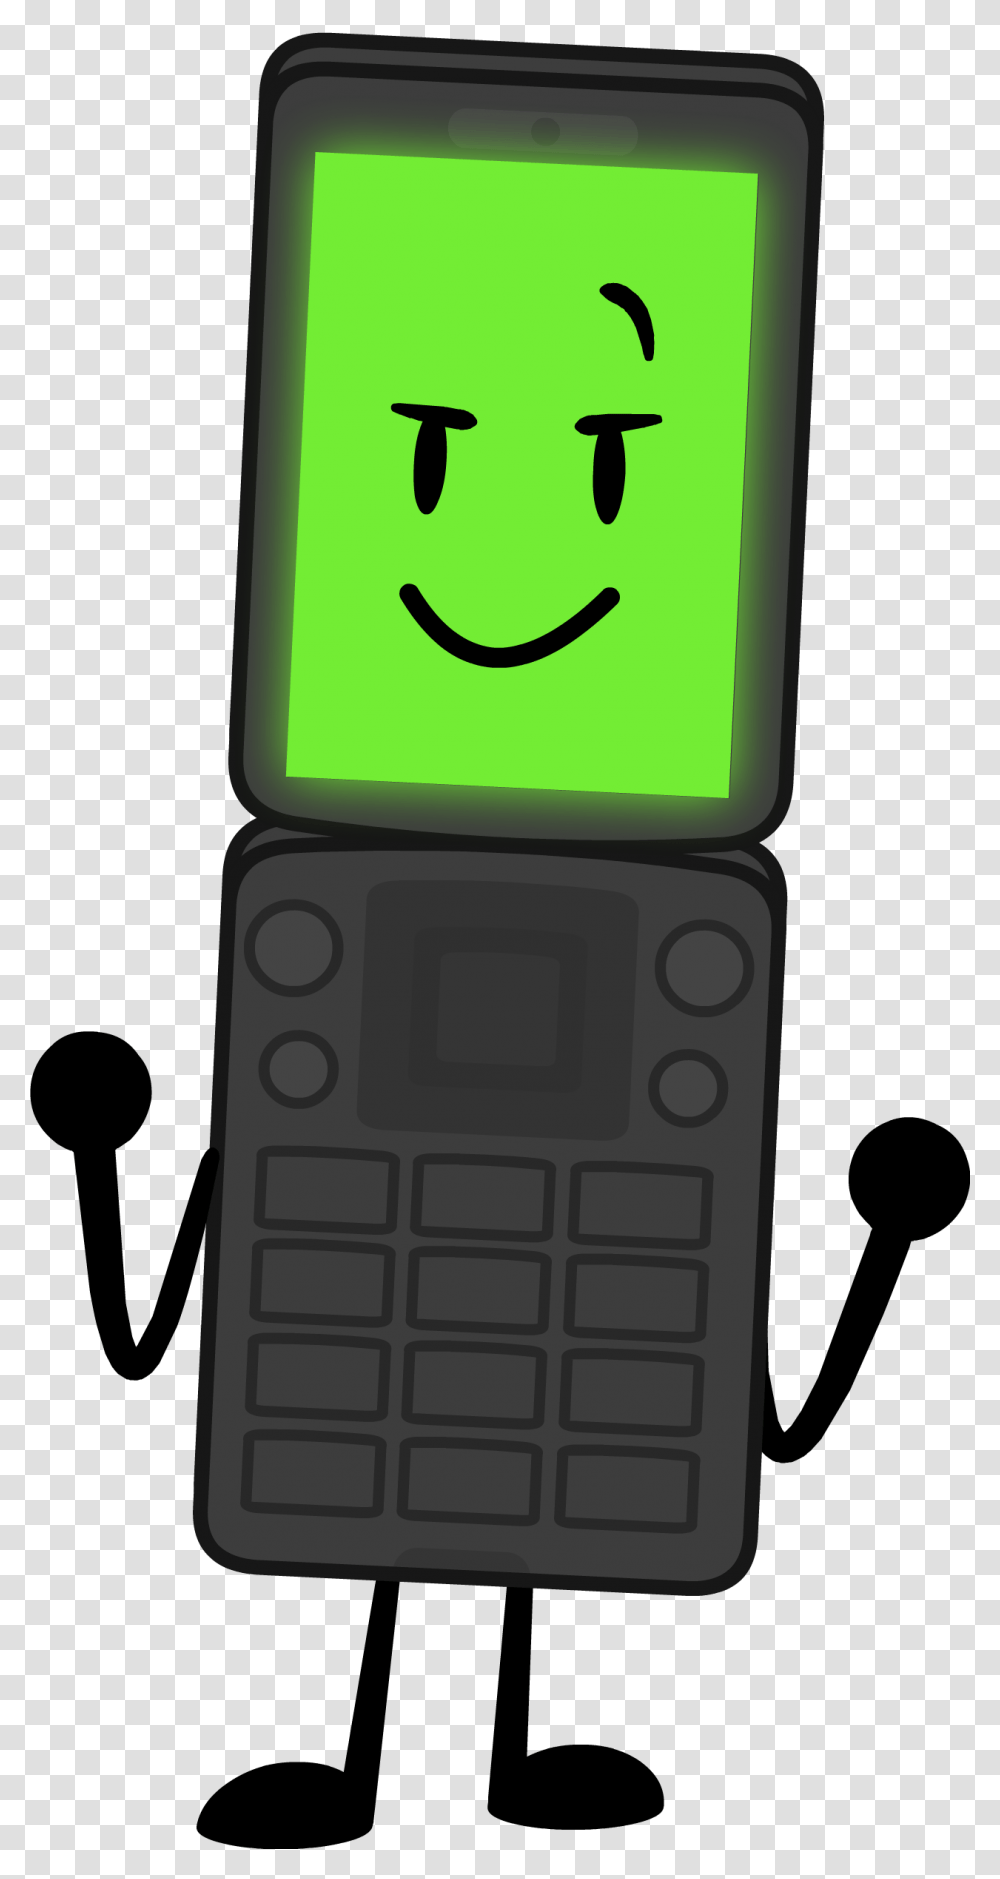 The Bfc Wiki Cartoon, Mobile Phone, Electronics, Cell Phone, Texting Transparent Png